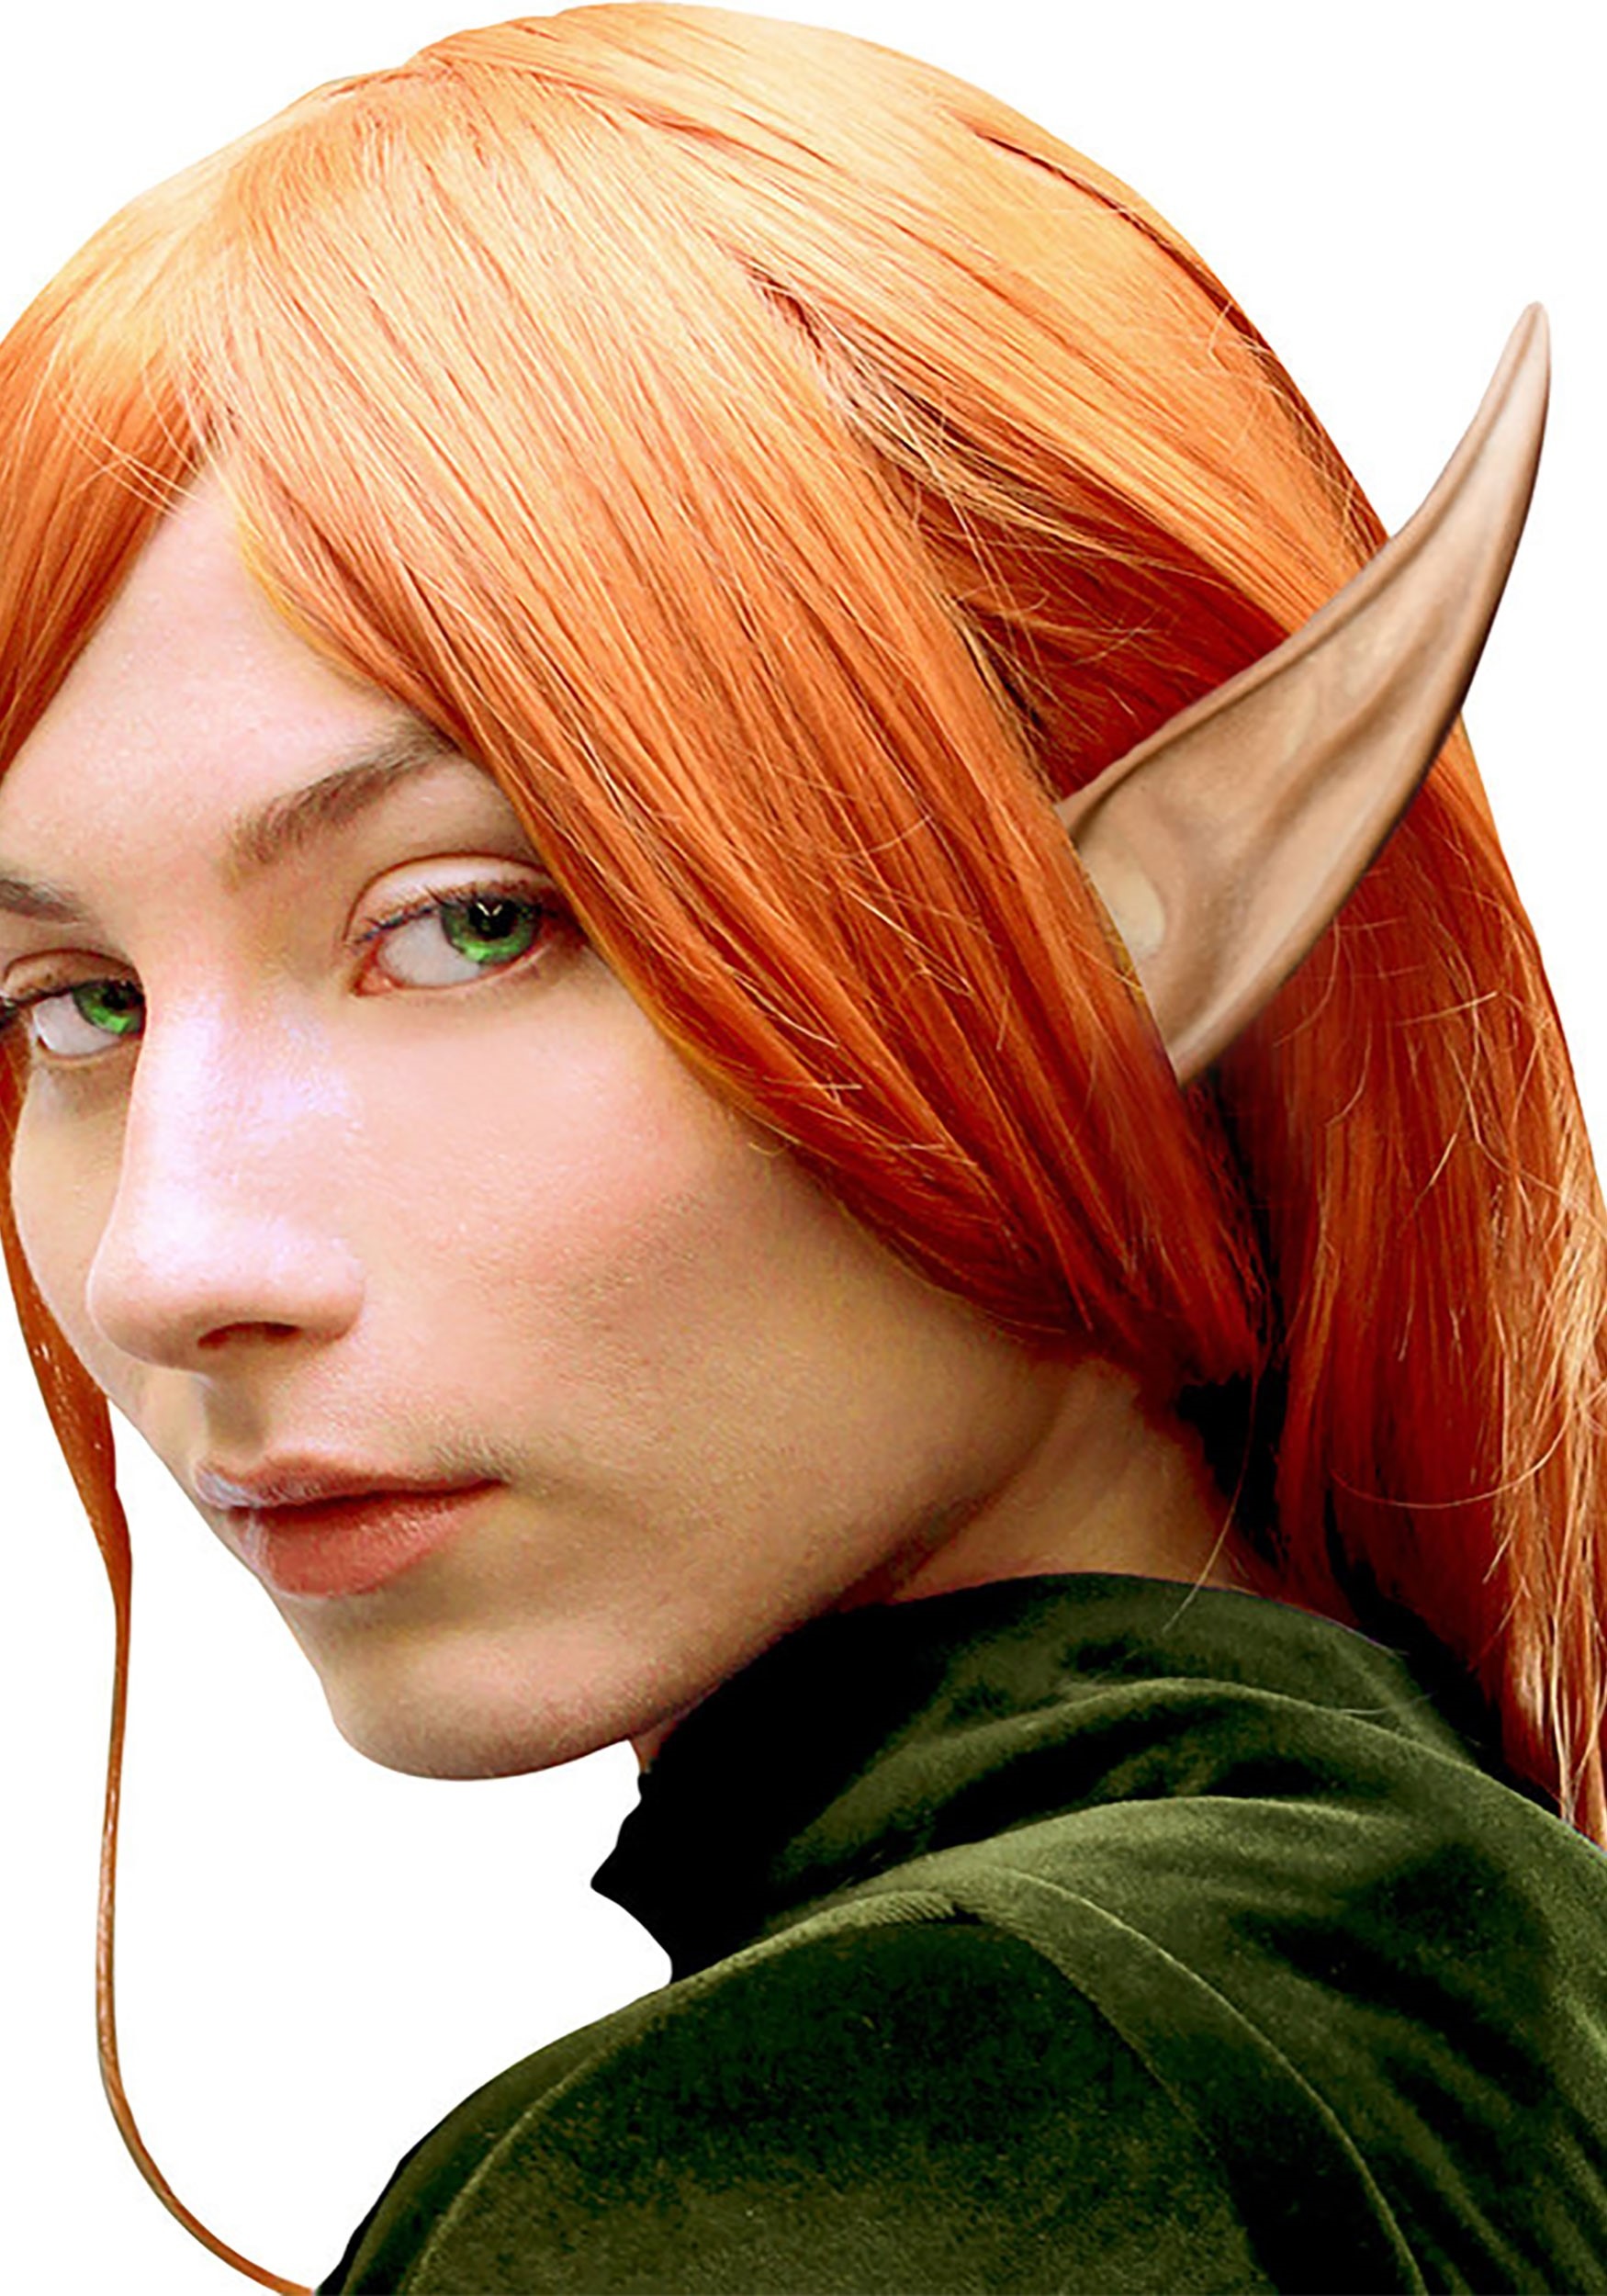 Large Elf Ears for Adults